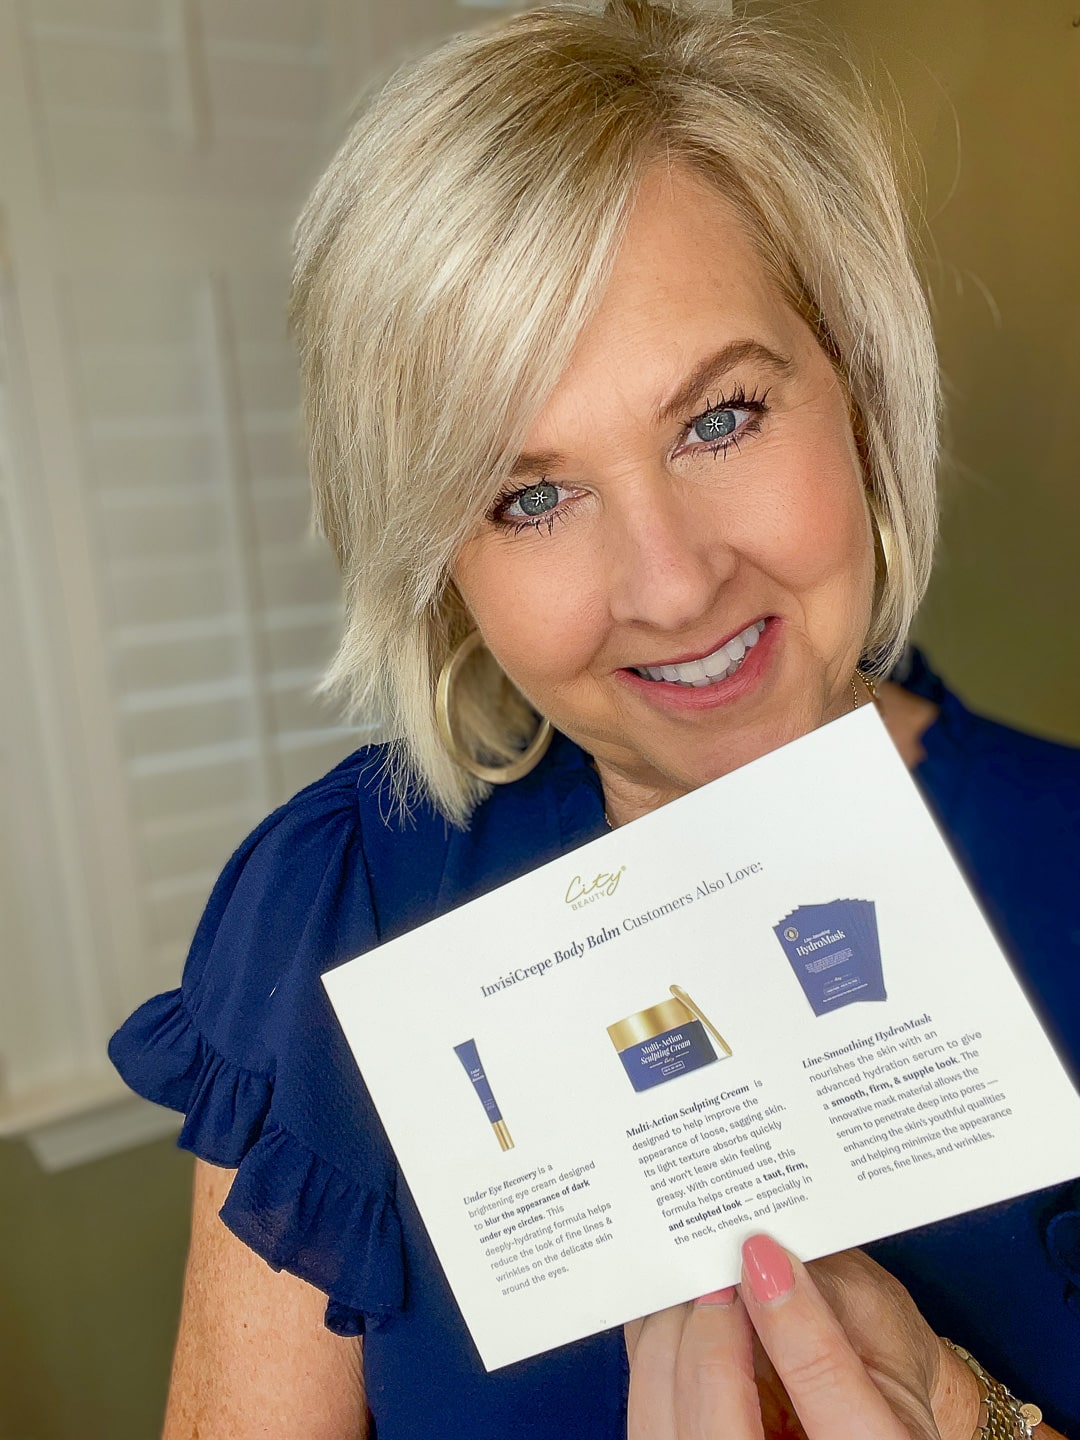 Over 40 Fashion Blogger, Tania Stephens is wearing a blue top and trying City Beauty's Inviscrepe Body Balm16